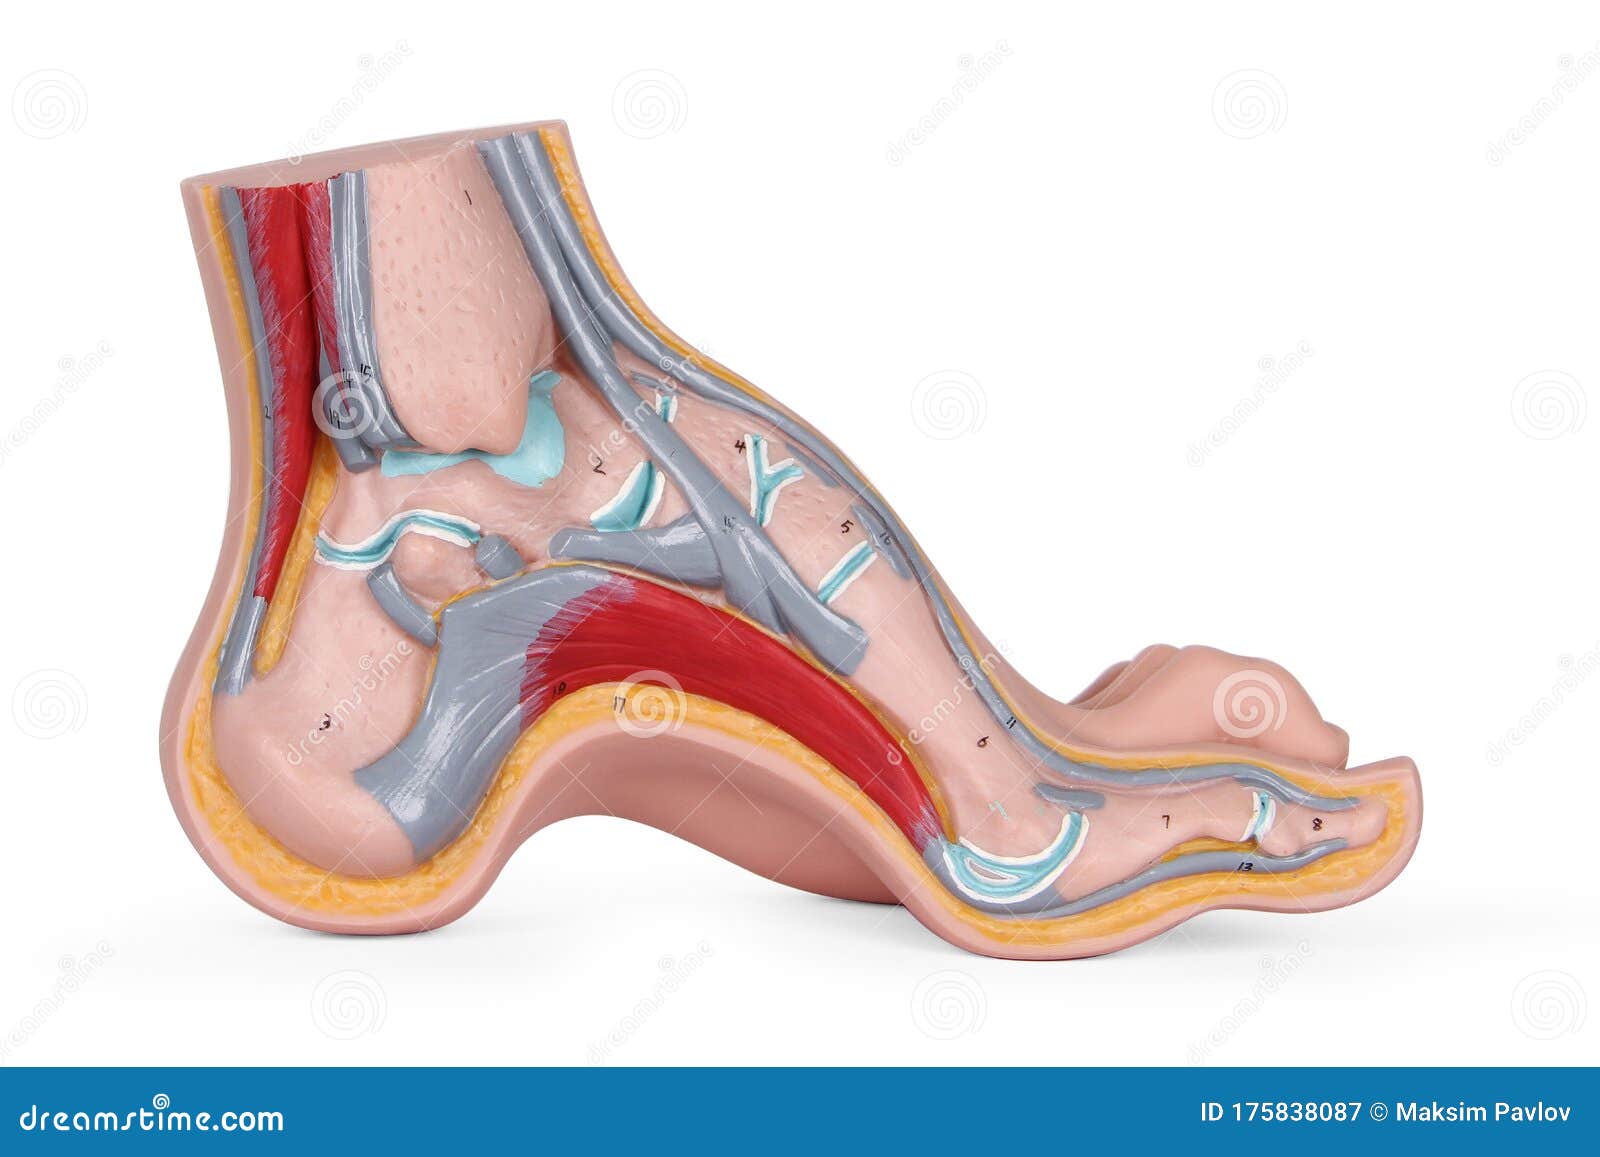 Bones Of The Lower Extremities Shin Foot Hip 3d Human Muscle Feet Anatomy Foot Biology Stock Image Image Of Muscles Circulatory 175838087